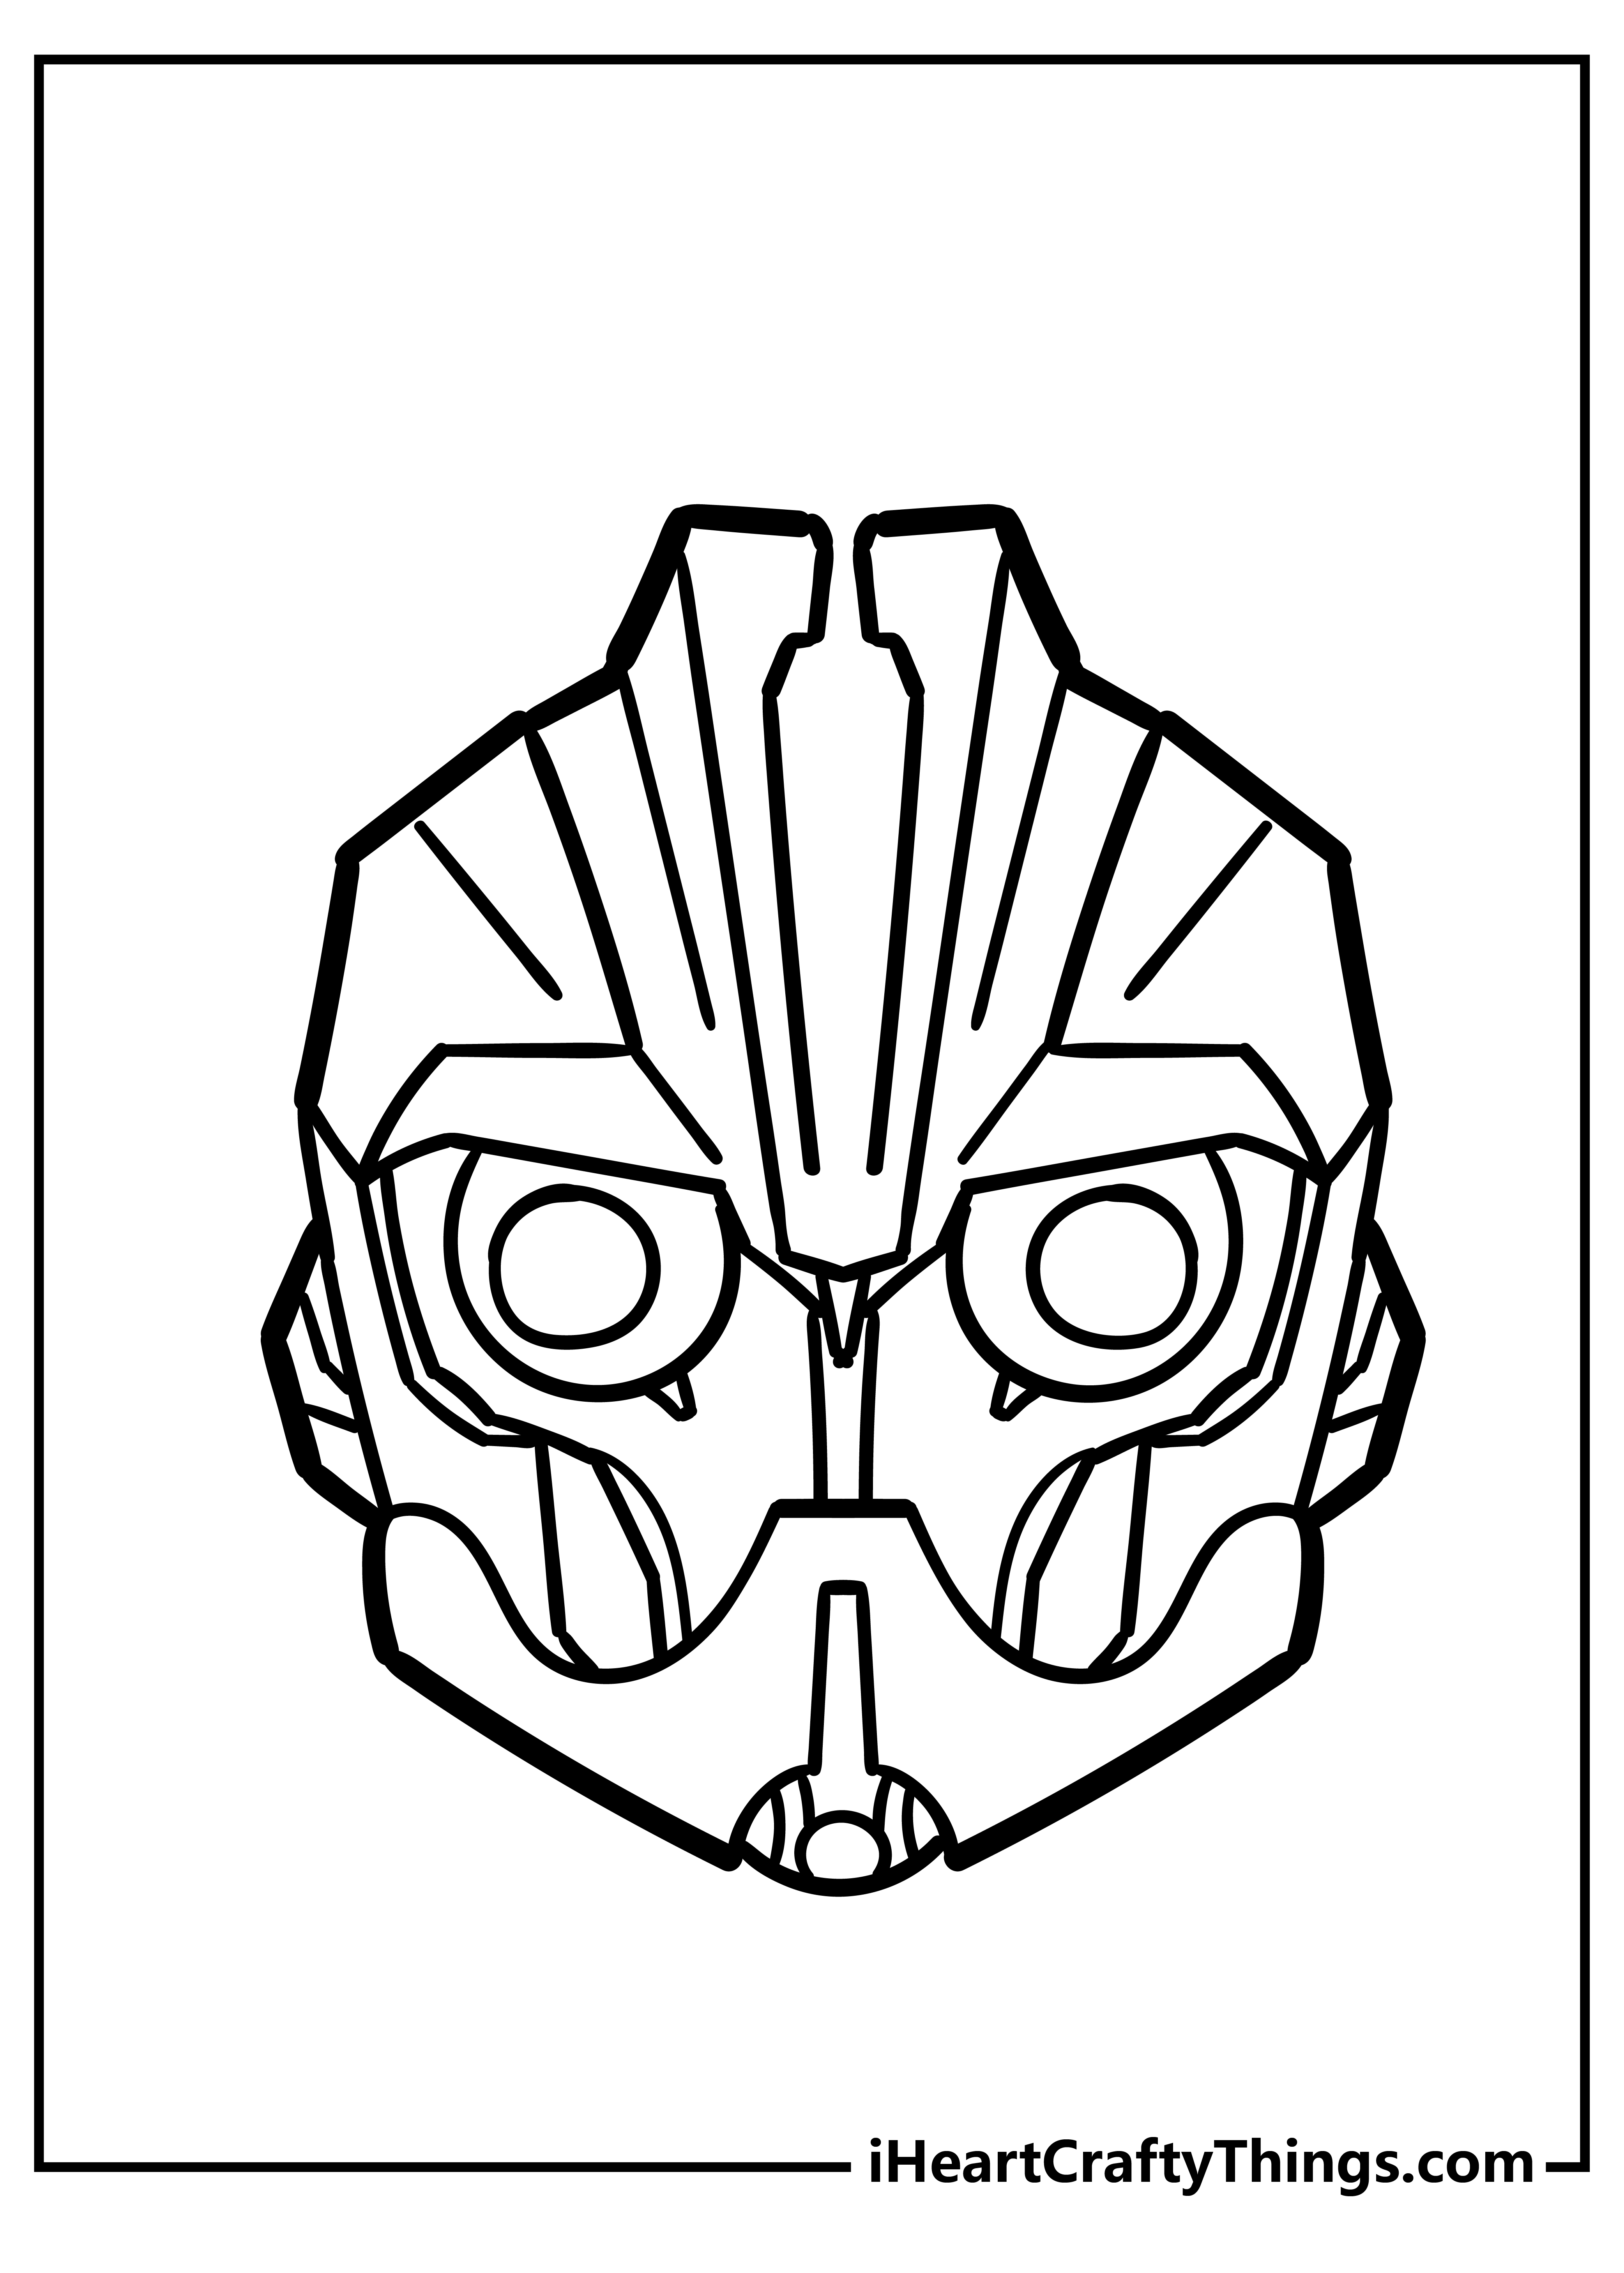 Bumblebee Coloring Sheet for children free download